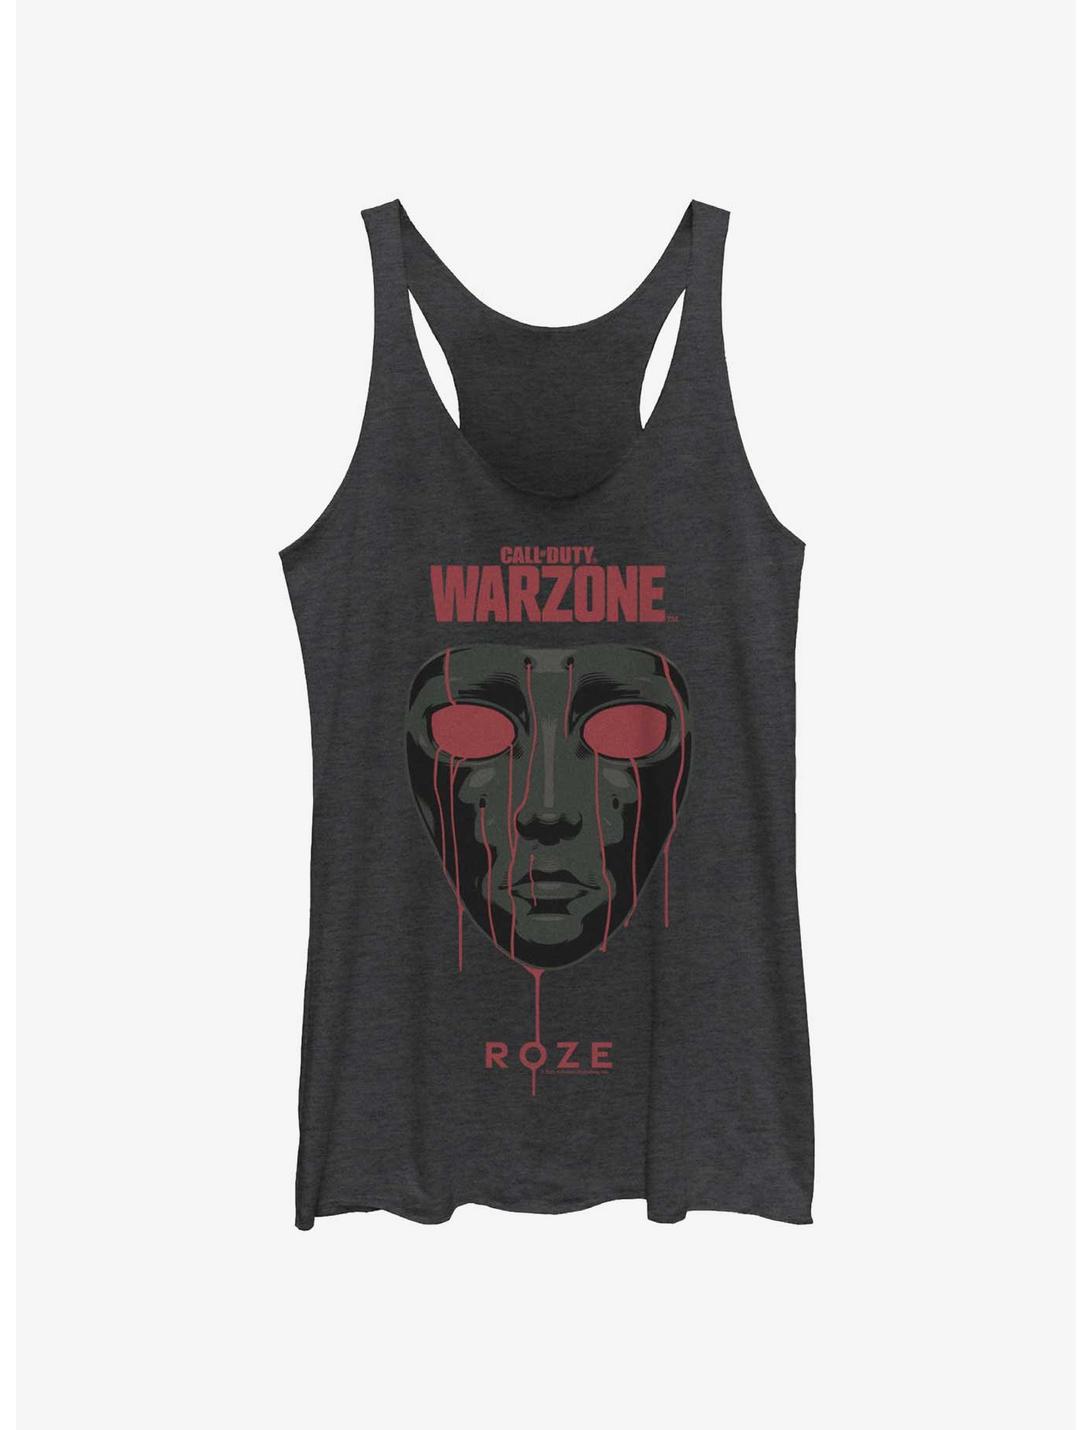 Call of Duty: Warzone Teary Roze Girls Tank, BLK HTR, hi-res